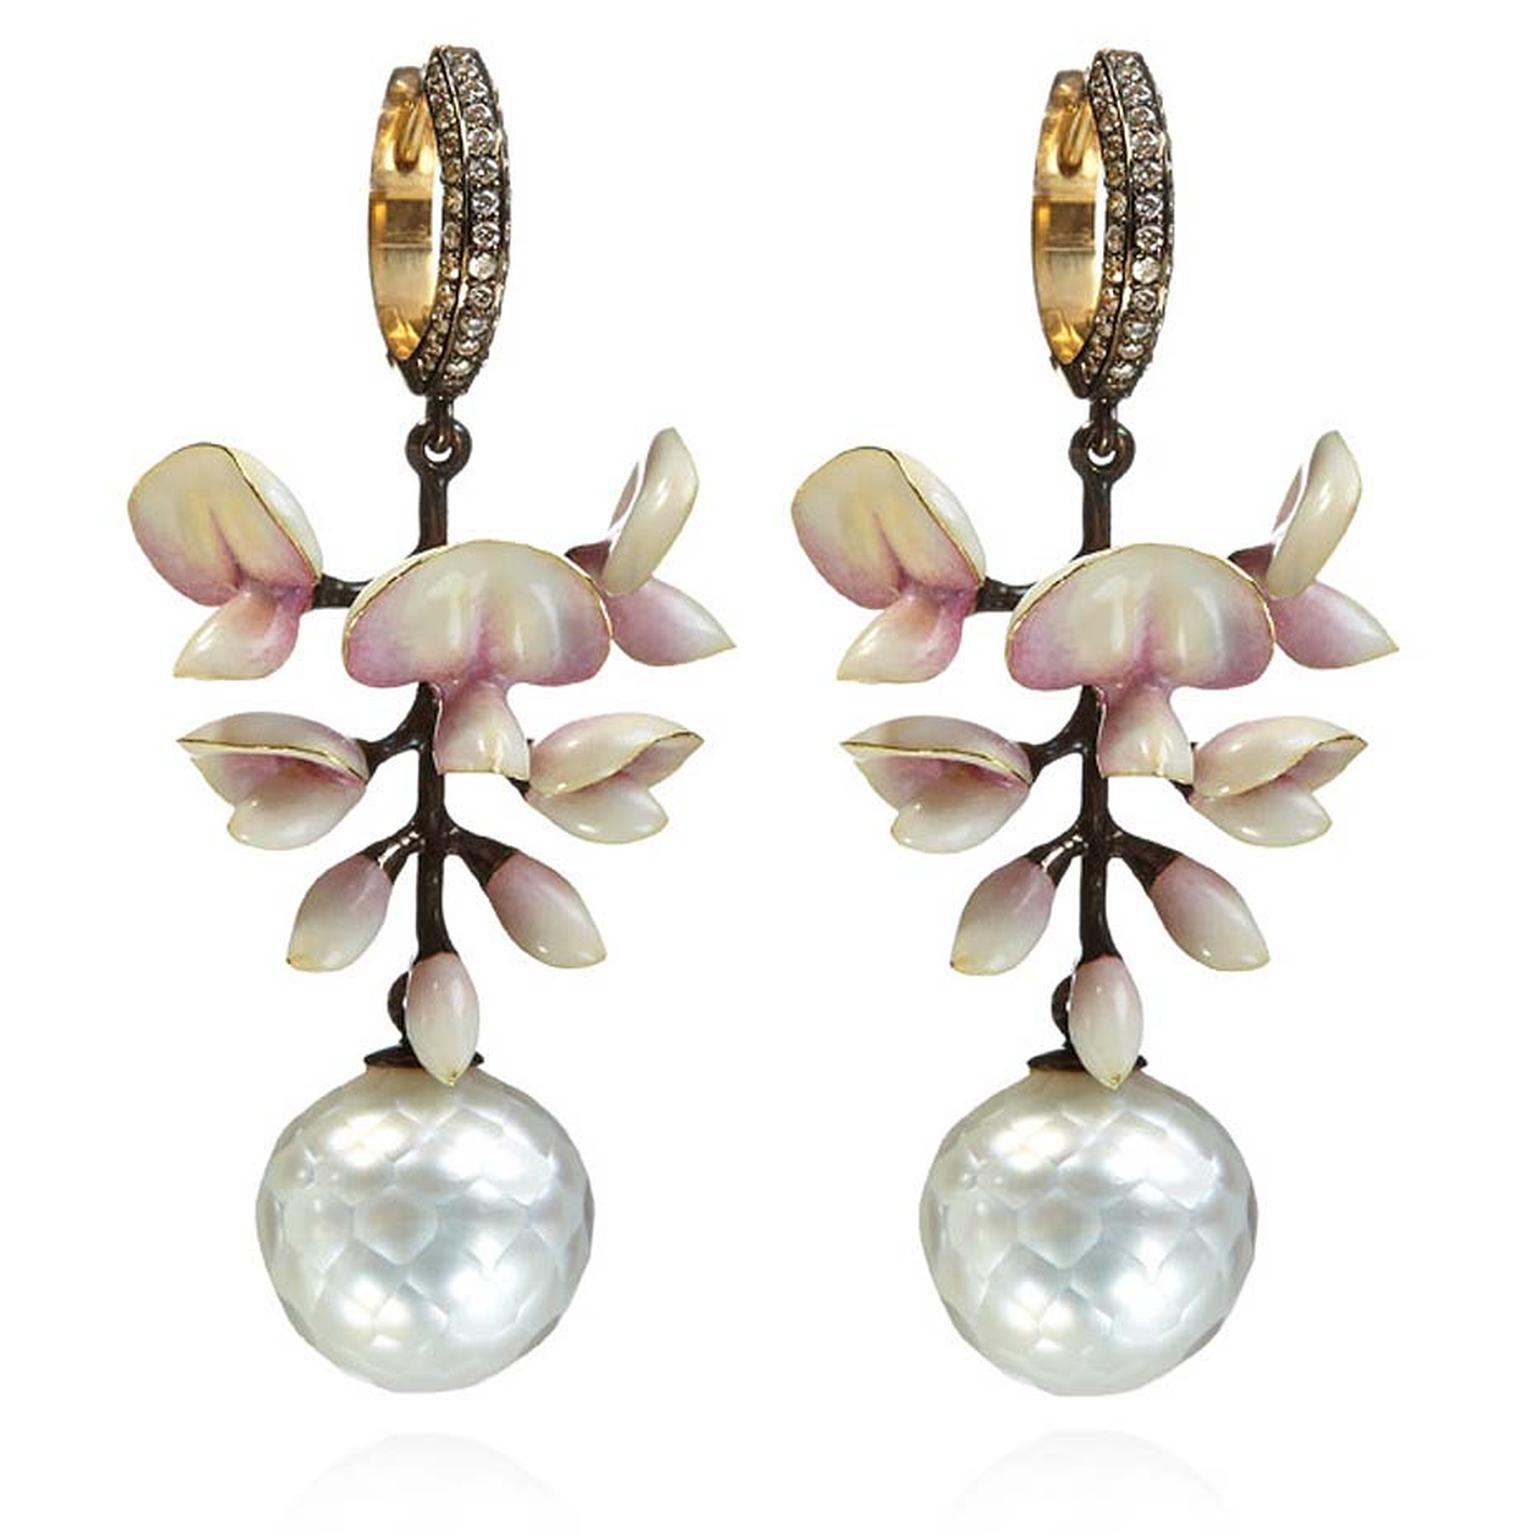 Ilgiz F for Annoushka Wisteria faceted pearl and enamel earrings depict a wisteria flower with yellow gold petals decorated with intricate pale pink enamelling. £23,400.